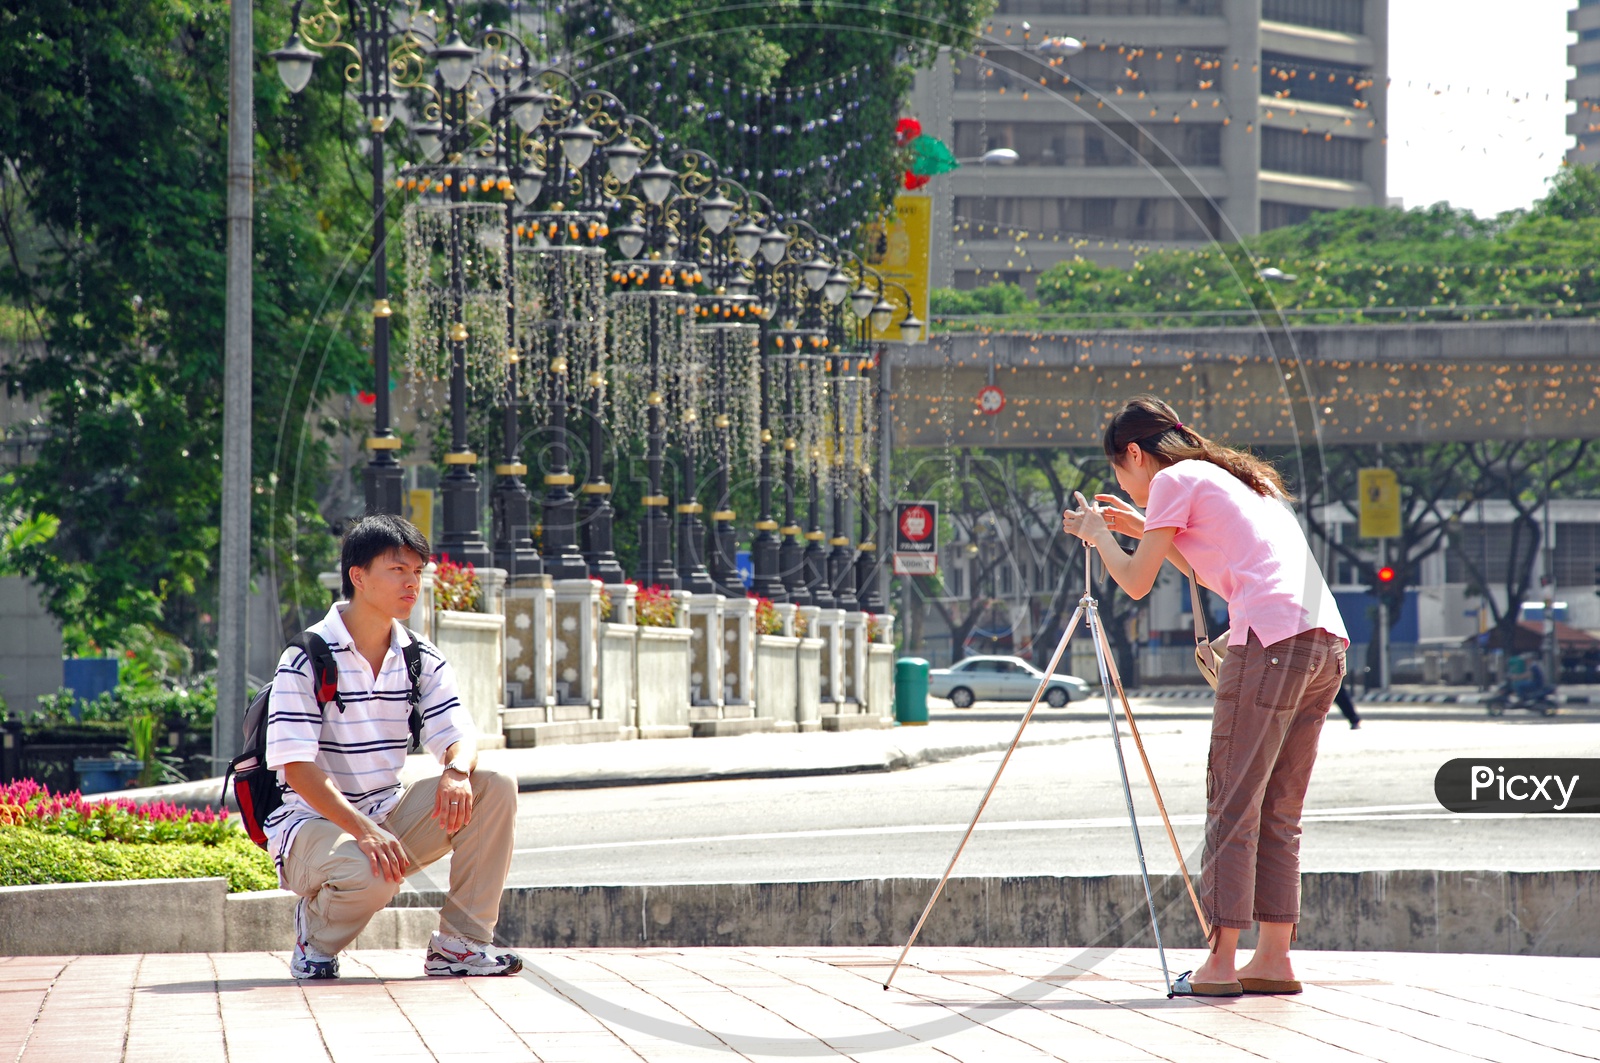 A Young Woman Taking Pictures With The Help of Tripod